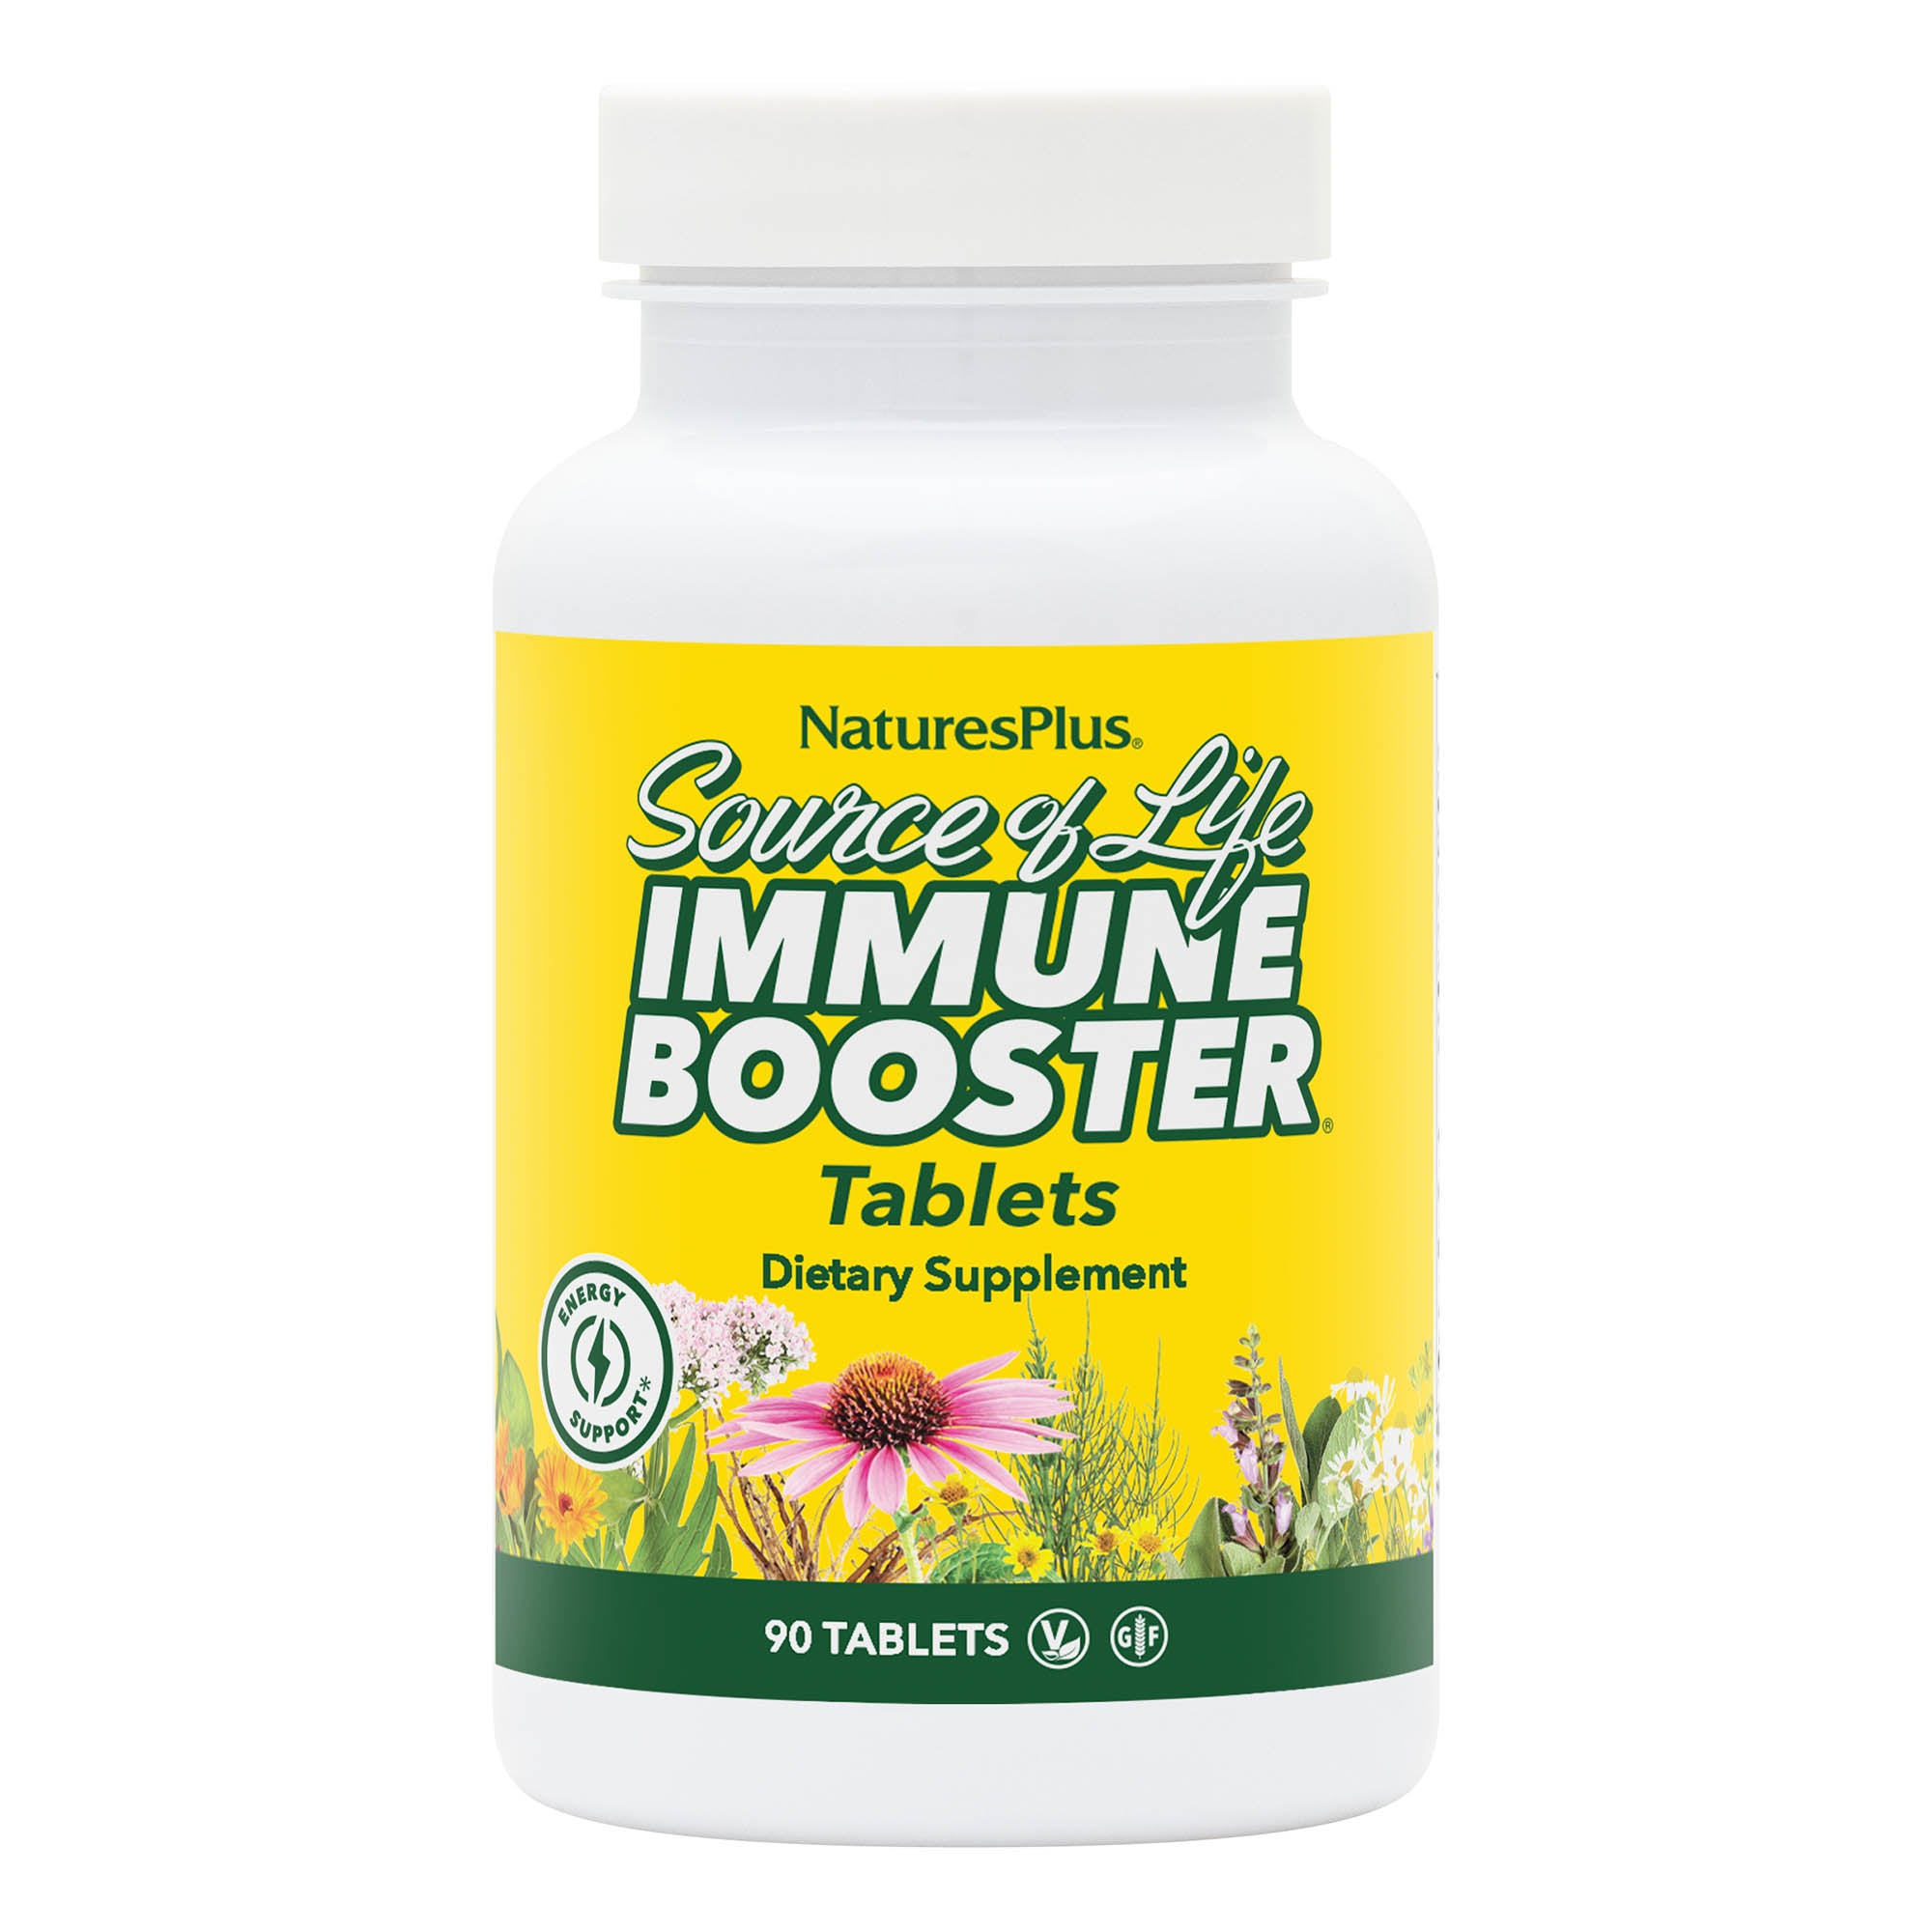 Source of Life® Immune Booster Bi-Layered Tablets